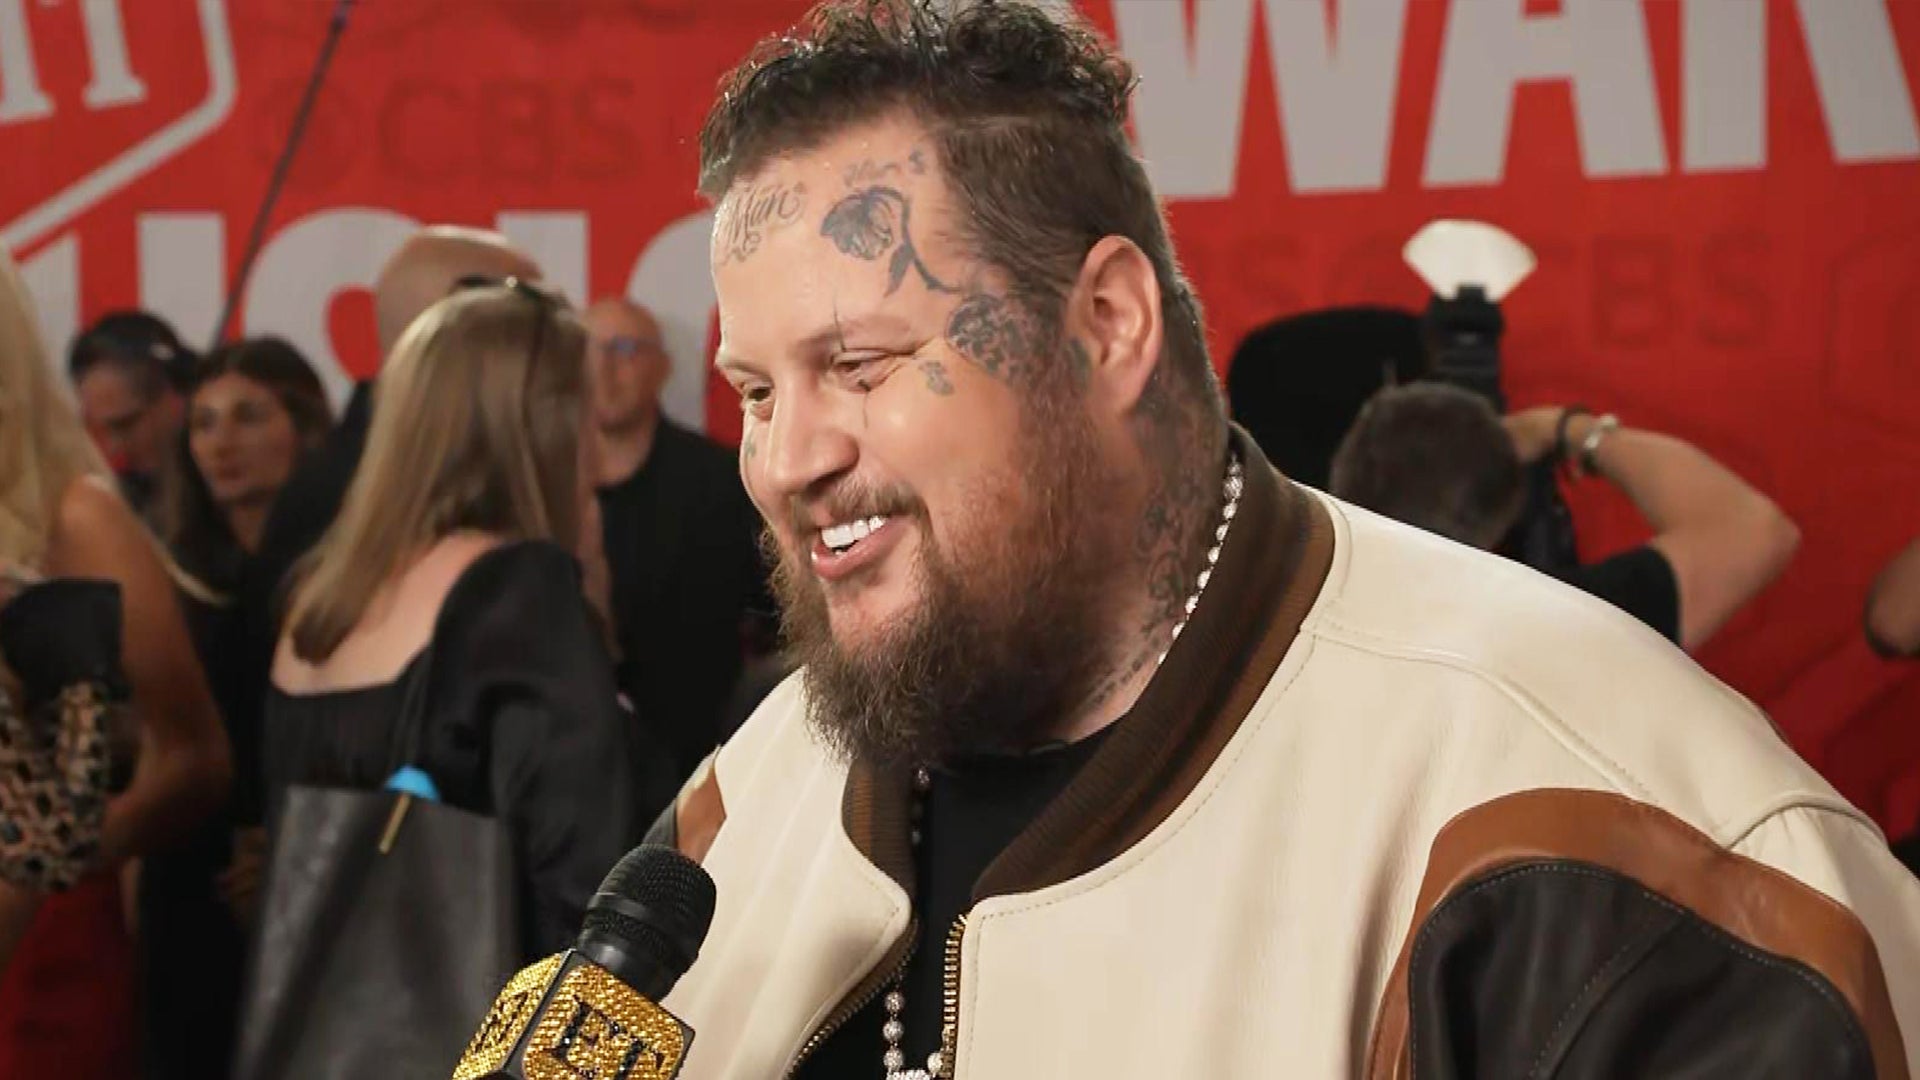 Jelly Roll Reacts to His Plane Having an Emergency Landing Ahead of CMT Awards (Exclusive)